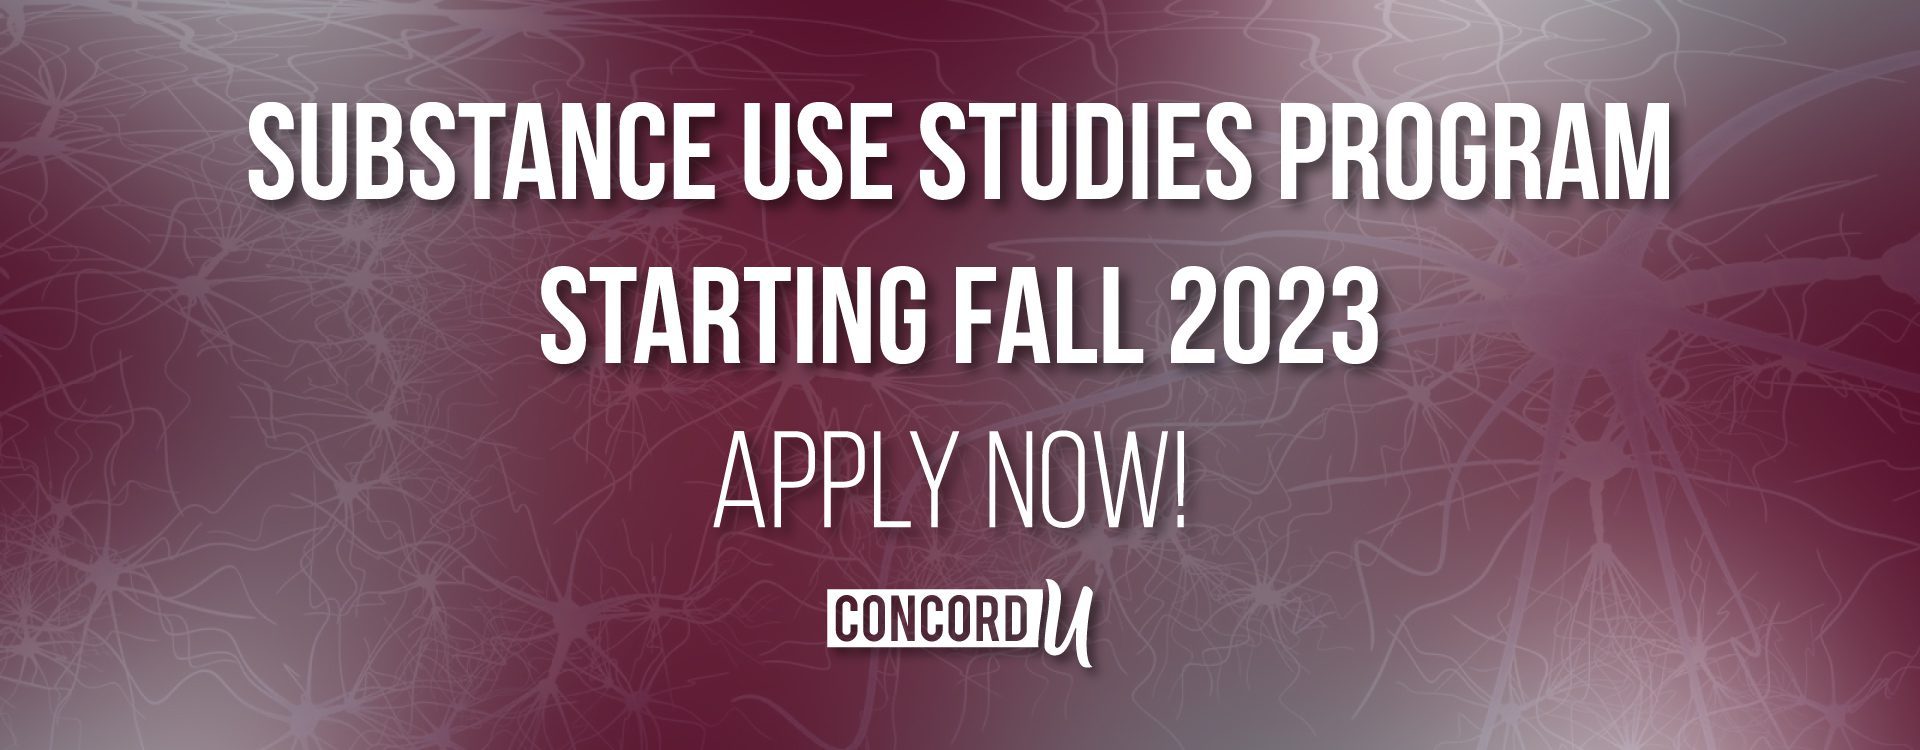 Concord University's substance use studies program is starting Fall 2023 - Apply now!